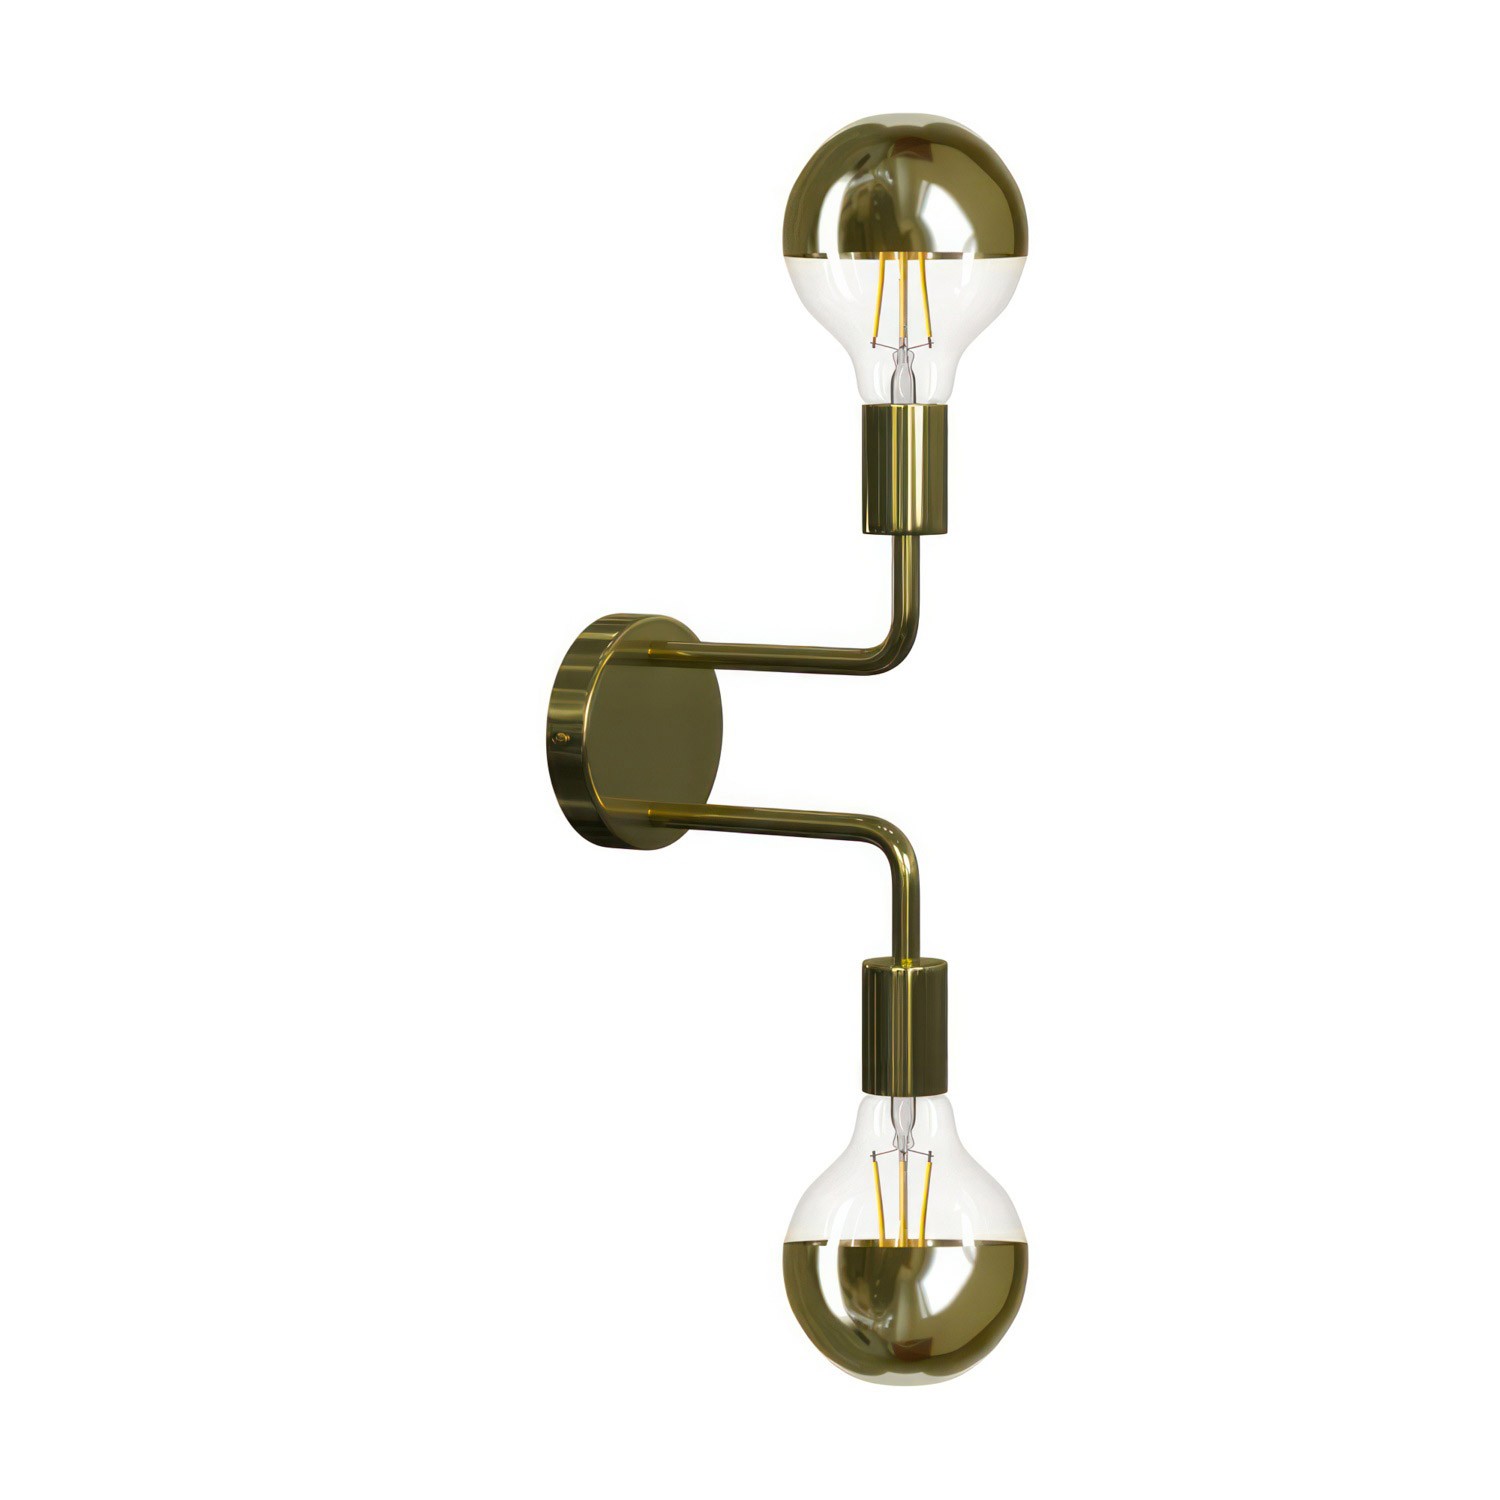 Fermaluce Metal, metal wall light with double bent extension